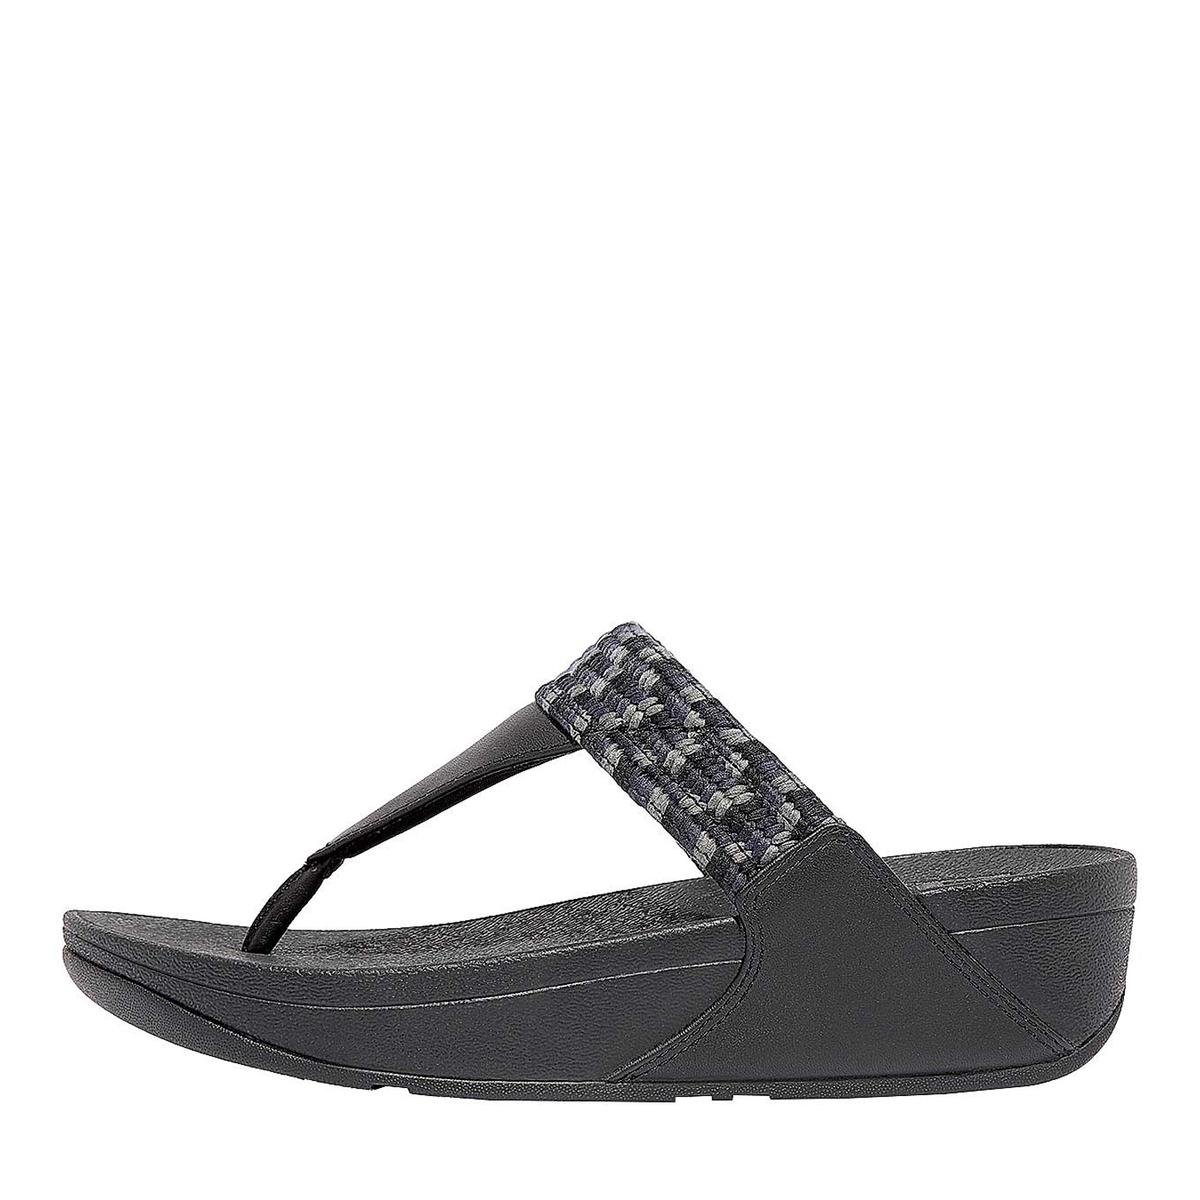 Buy FitFlop Women's Twiss Slide Sandal at Ubuy India